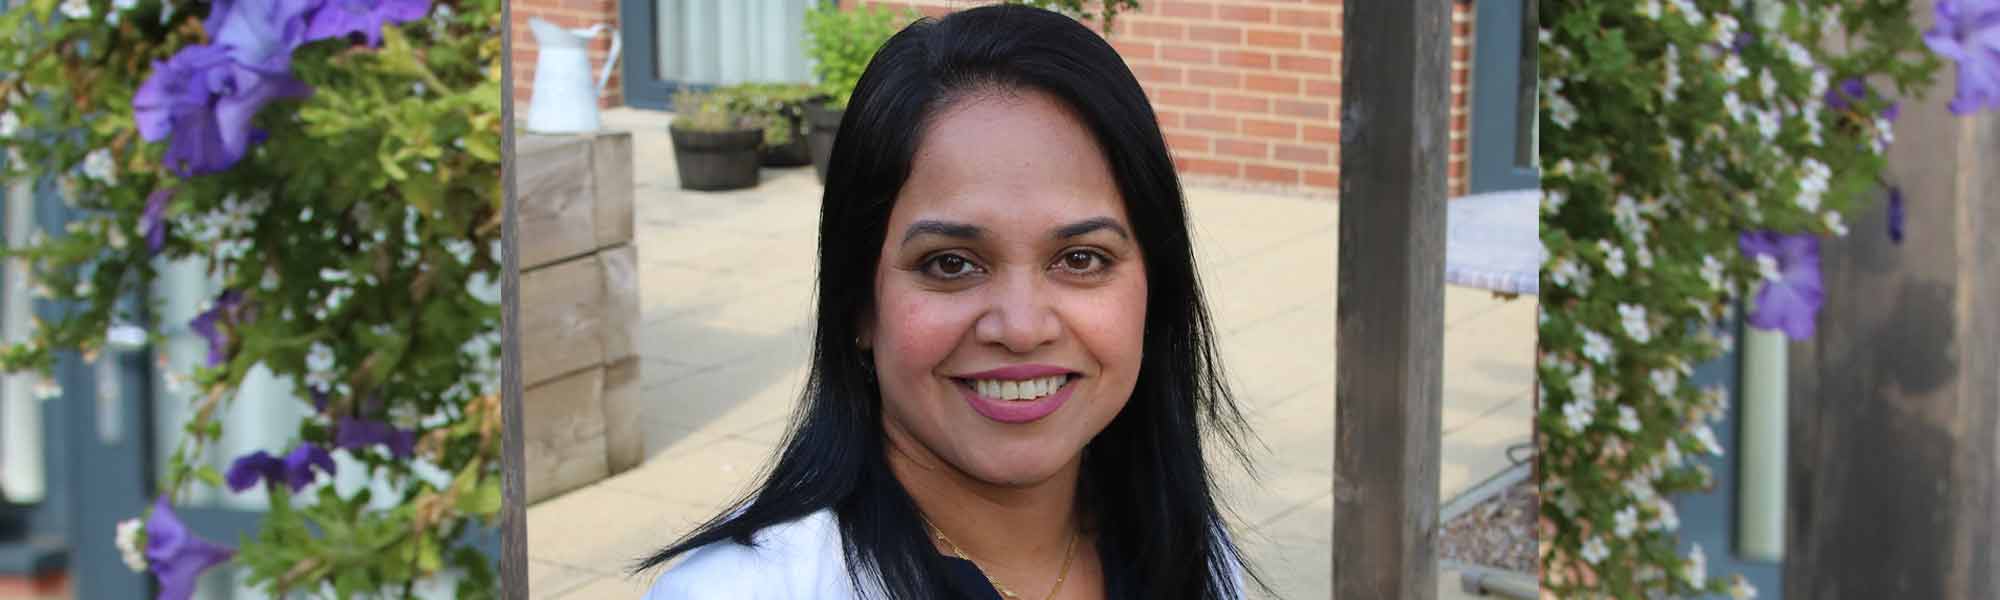 Shweta Mendon New Home Manager at Spencer House Care Home